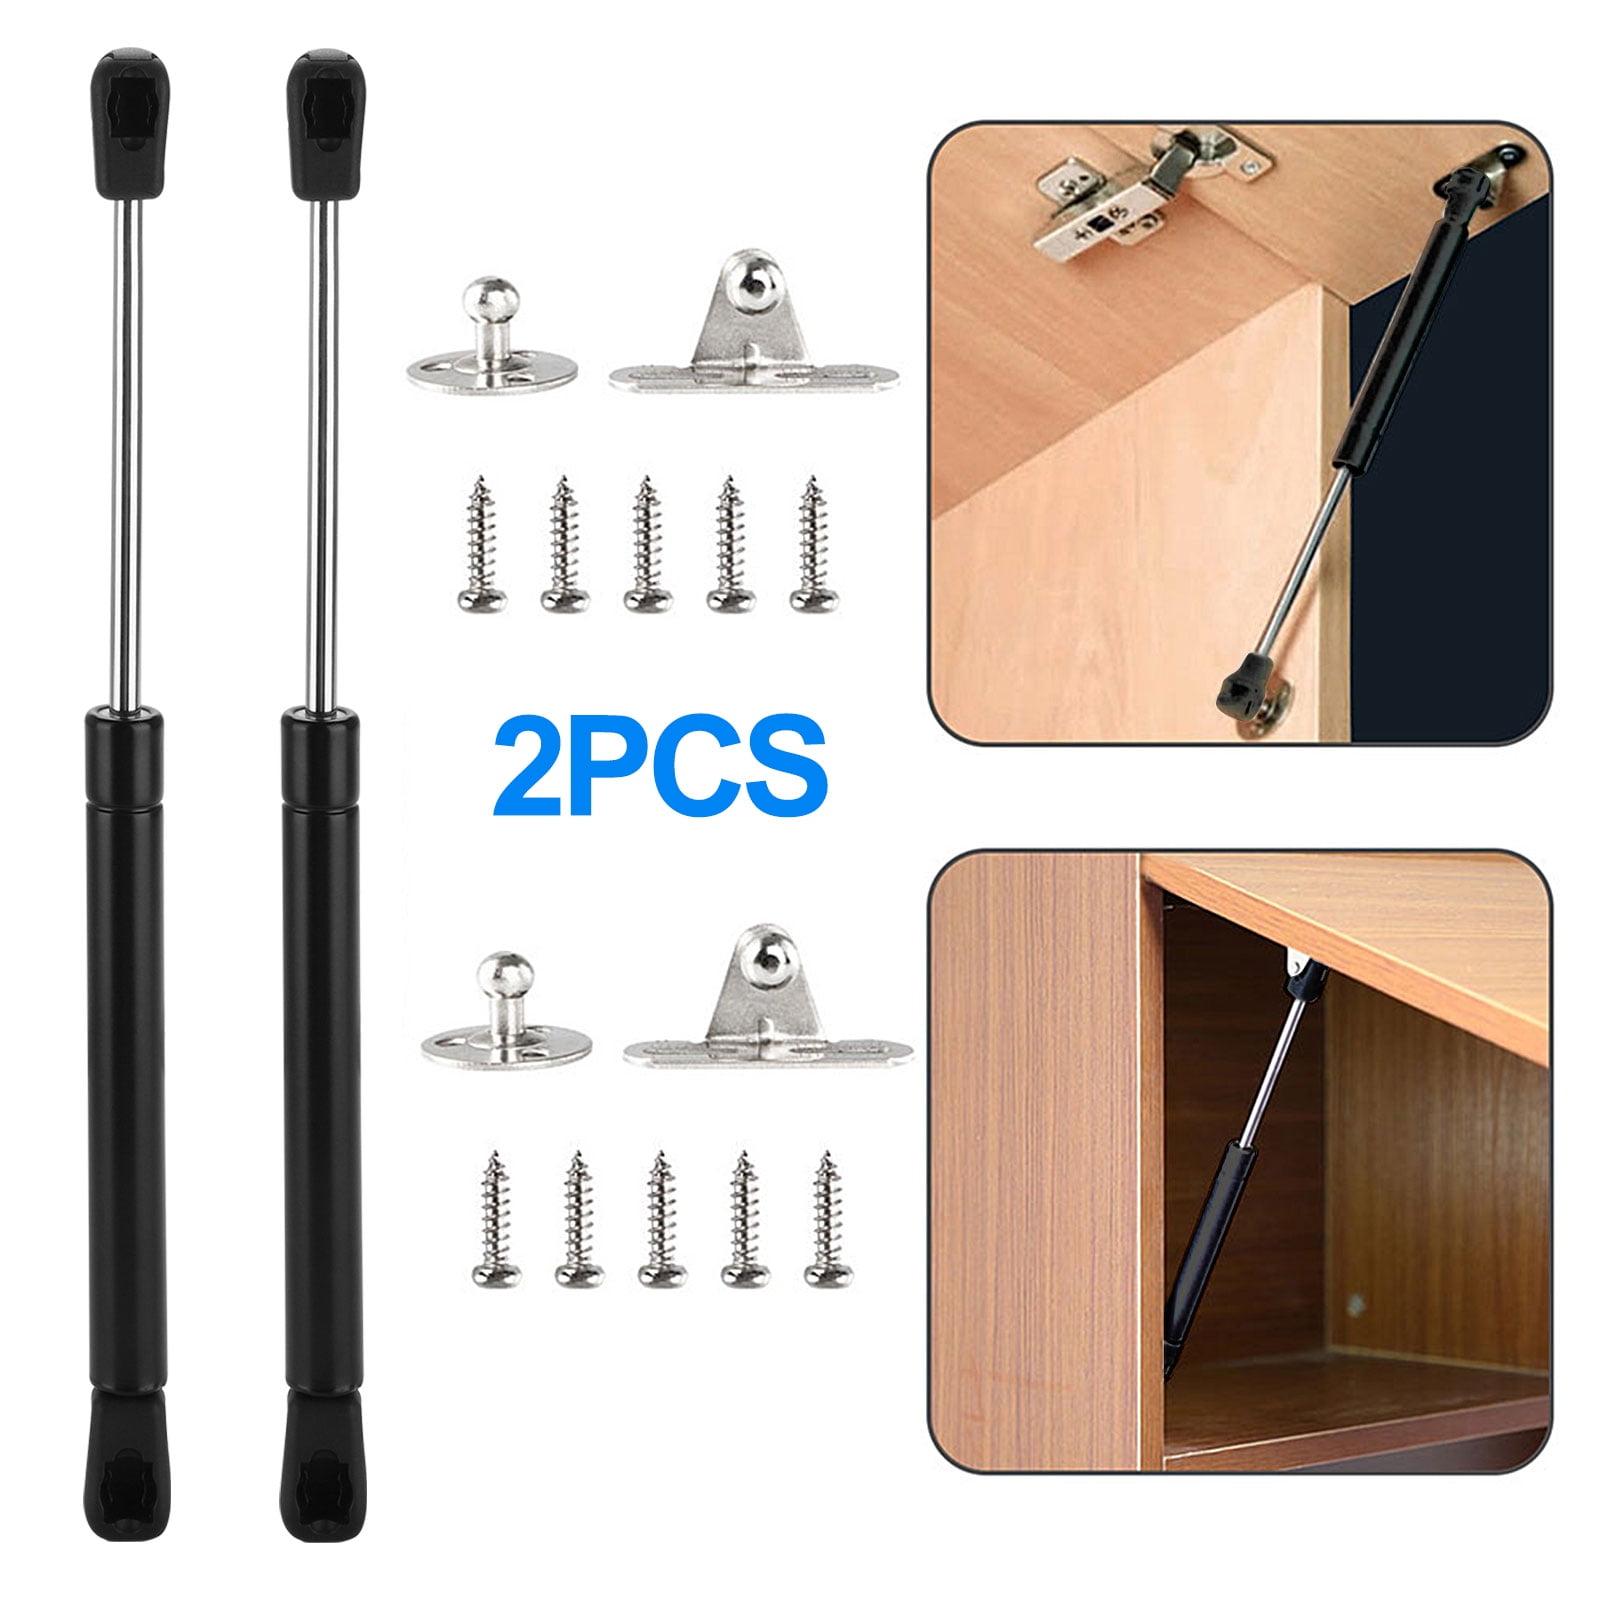 7in 80N/18lb Gas Strut Gas Shock Spring Lid Support for Cabinet Door Sentry Safe Box Toy Box,Set of 2 